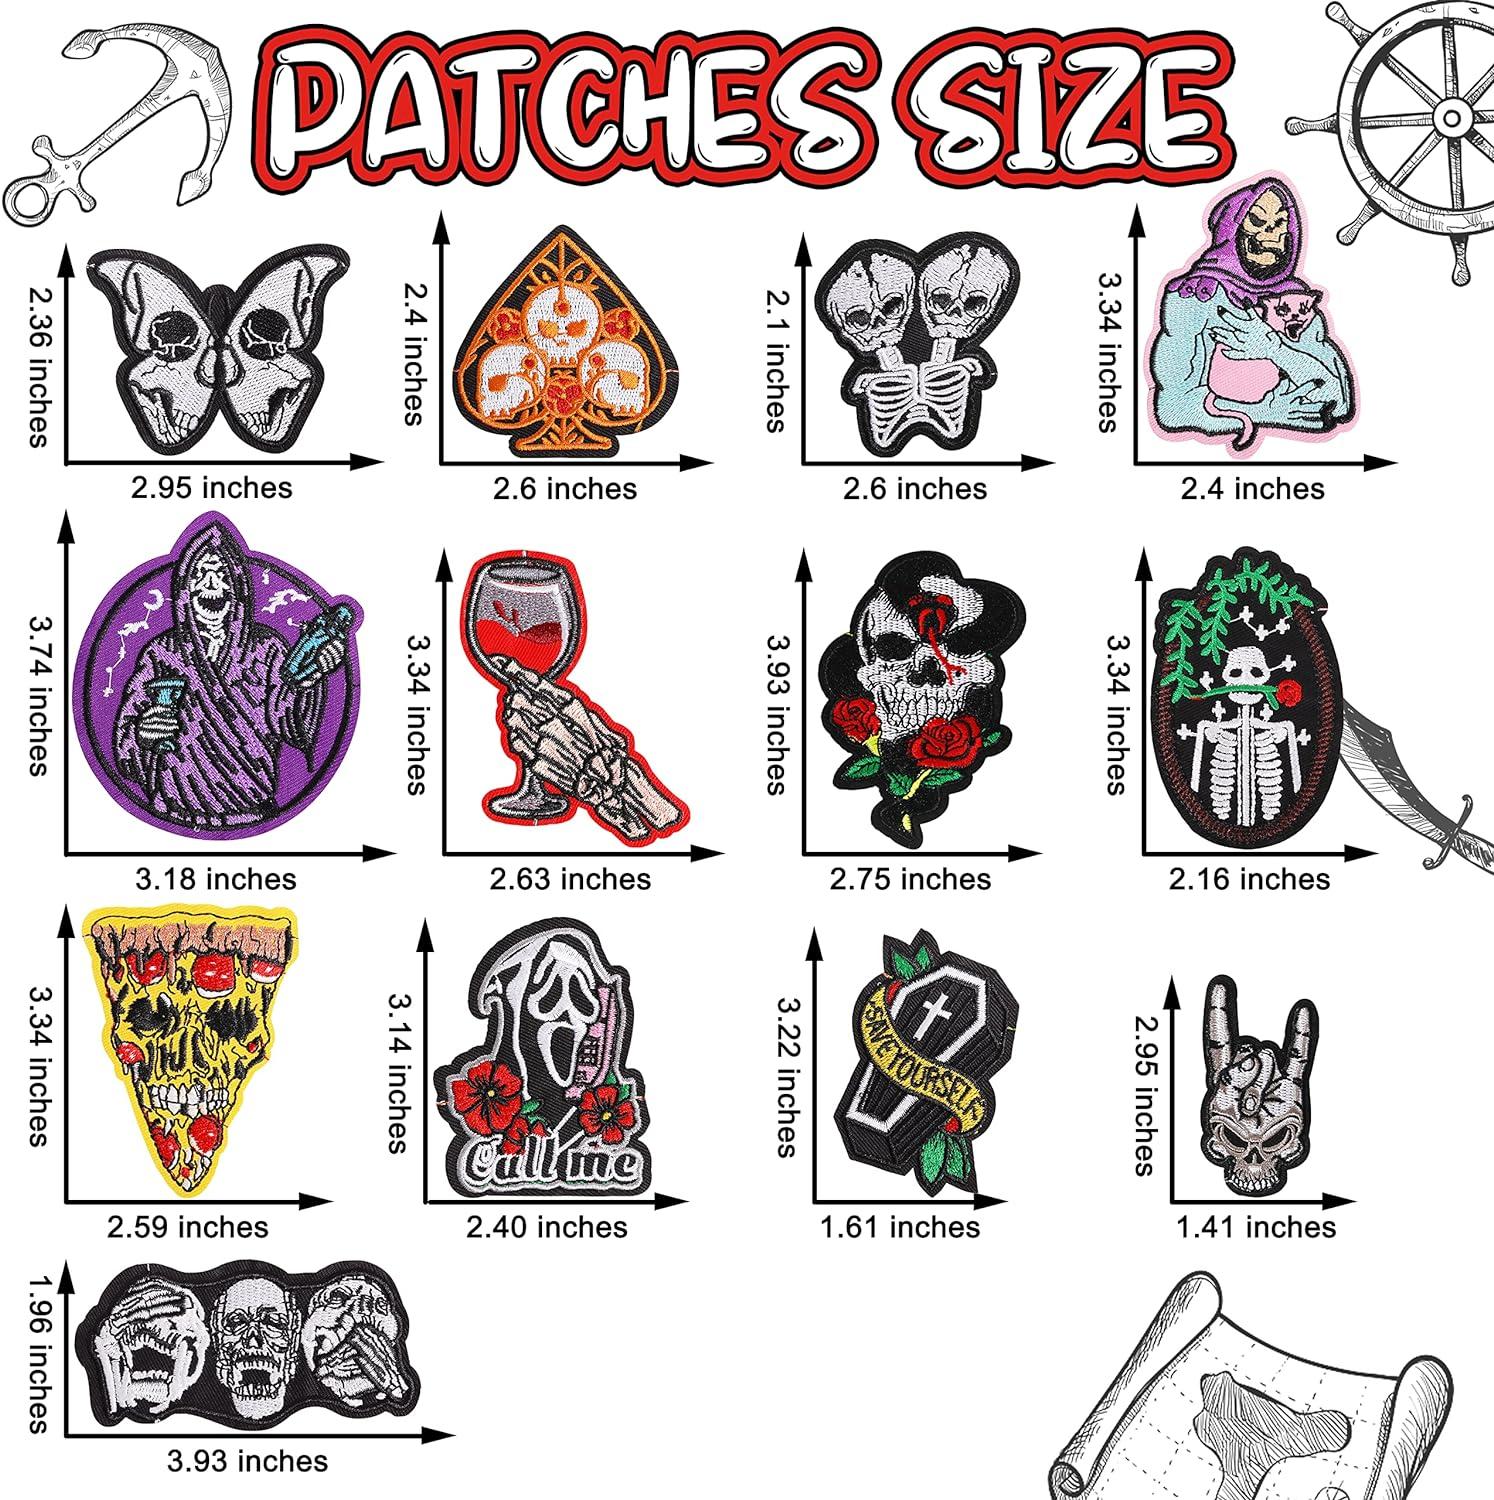 KINGSOW Skull Embroidered Iron-on Patches: 32pcs Assorted Colorful Series  Cool Goth Punk Style Sew-on Repair Decorative Patch Applique for Jackets  Jean Clothing Backpacks